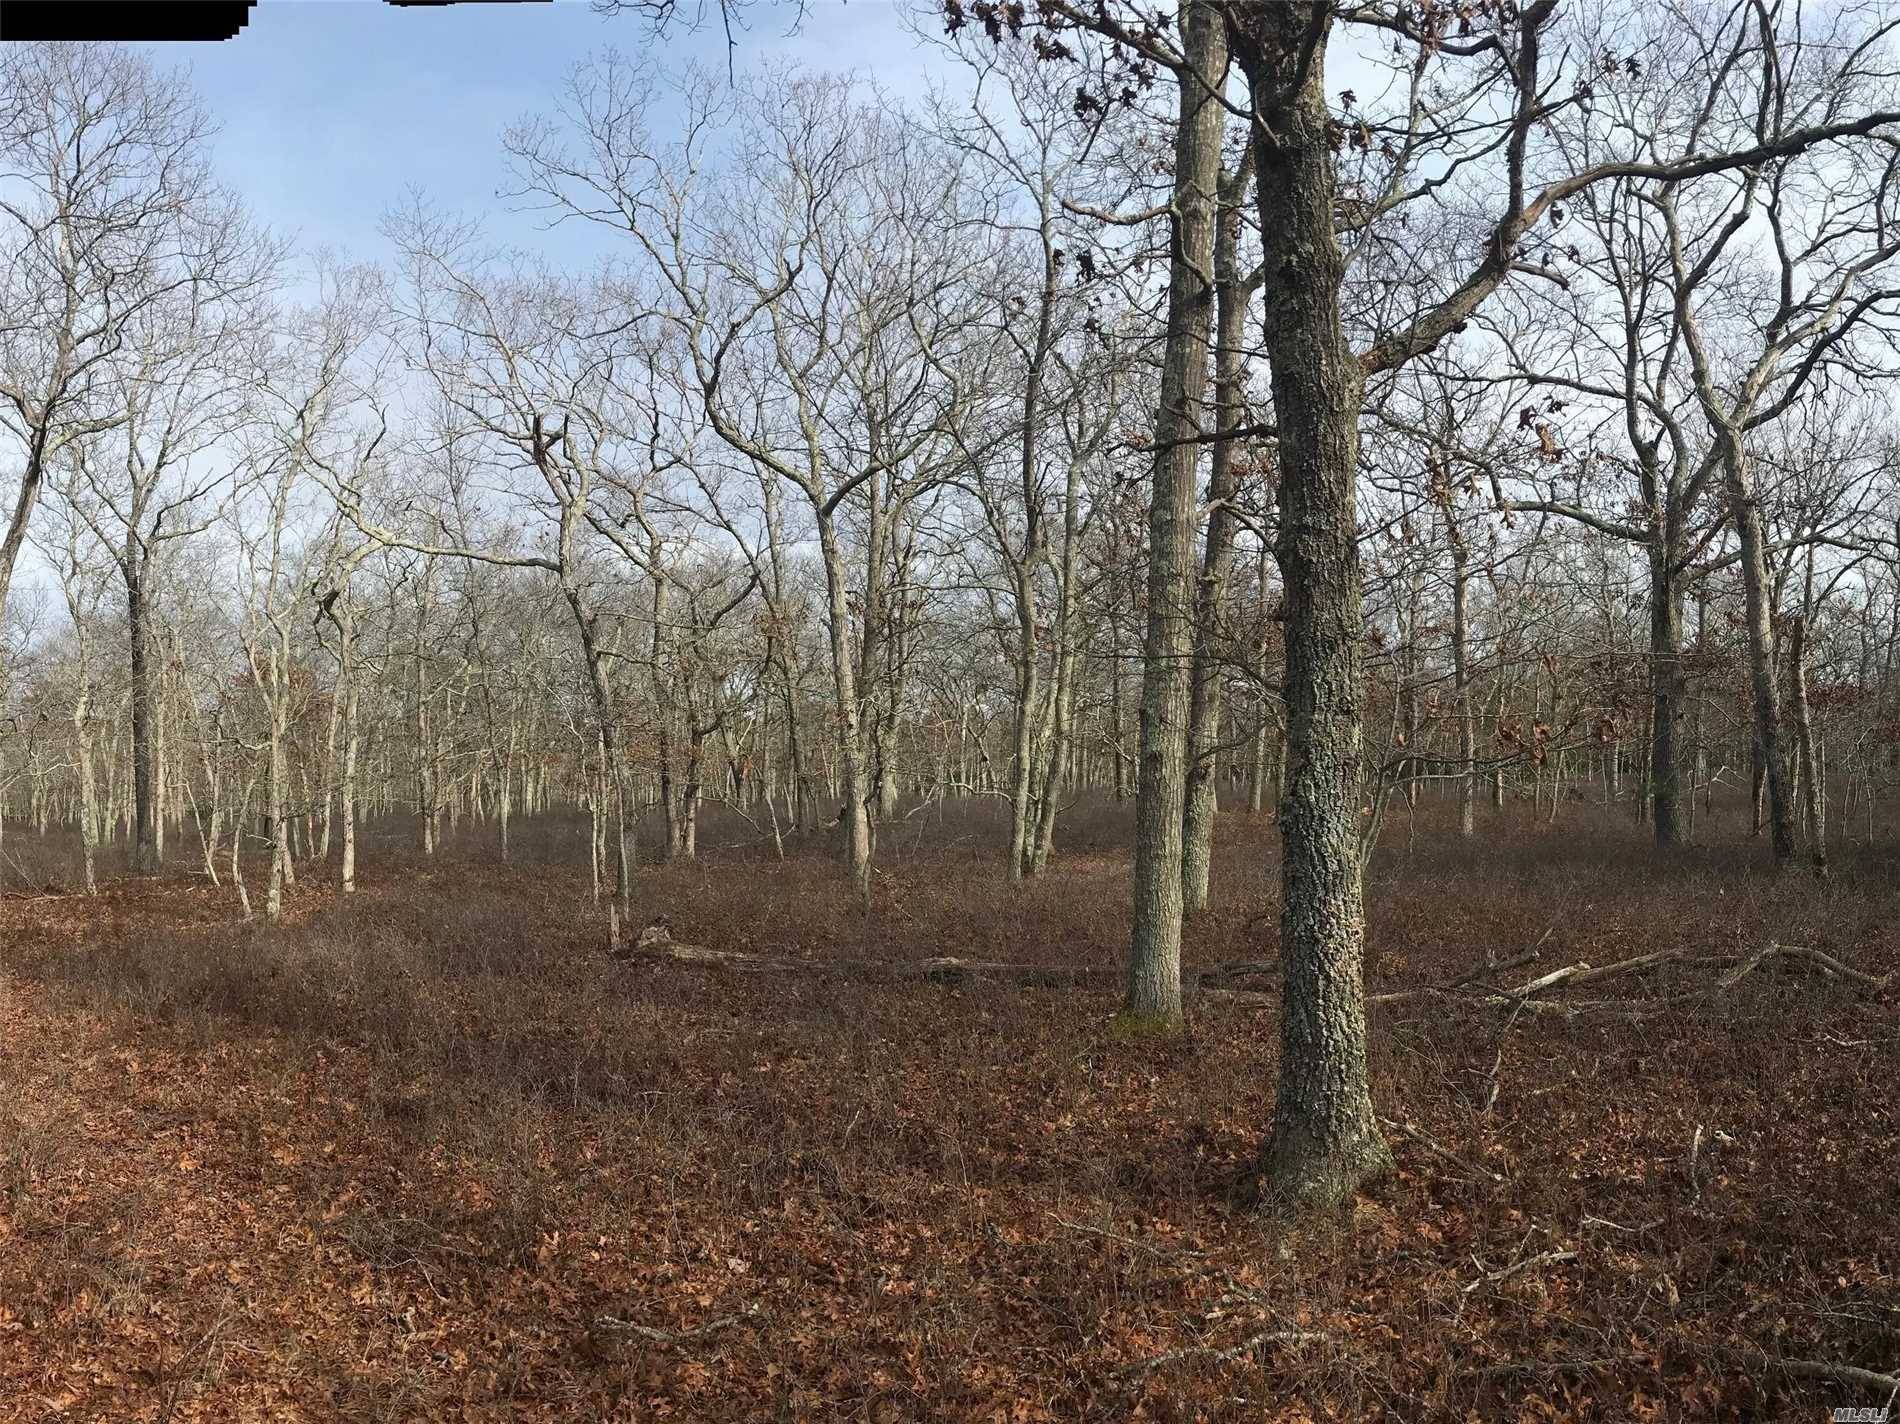 Rolling Hills Blanketed With Beautiful Oaks And White Pines Will Captivate Your Imagination As You Take In This Impressive 7 Acre Lot Surrounded On Three Sides By East Hampton Community ...